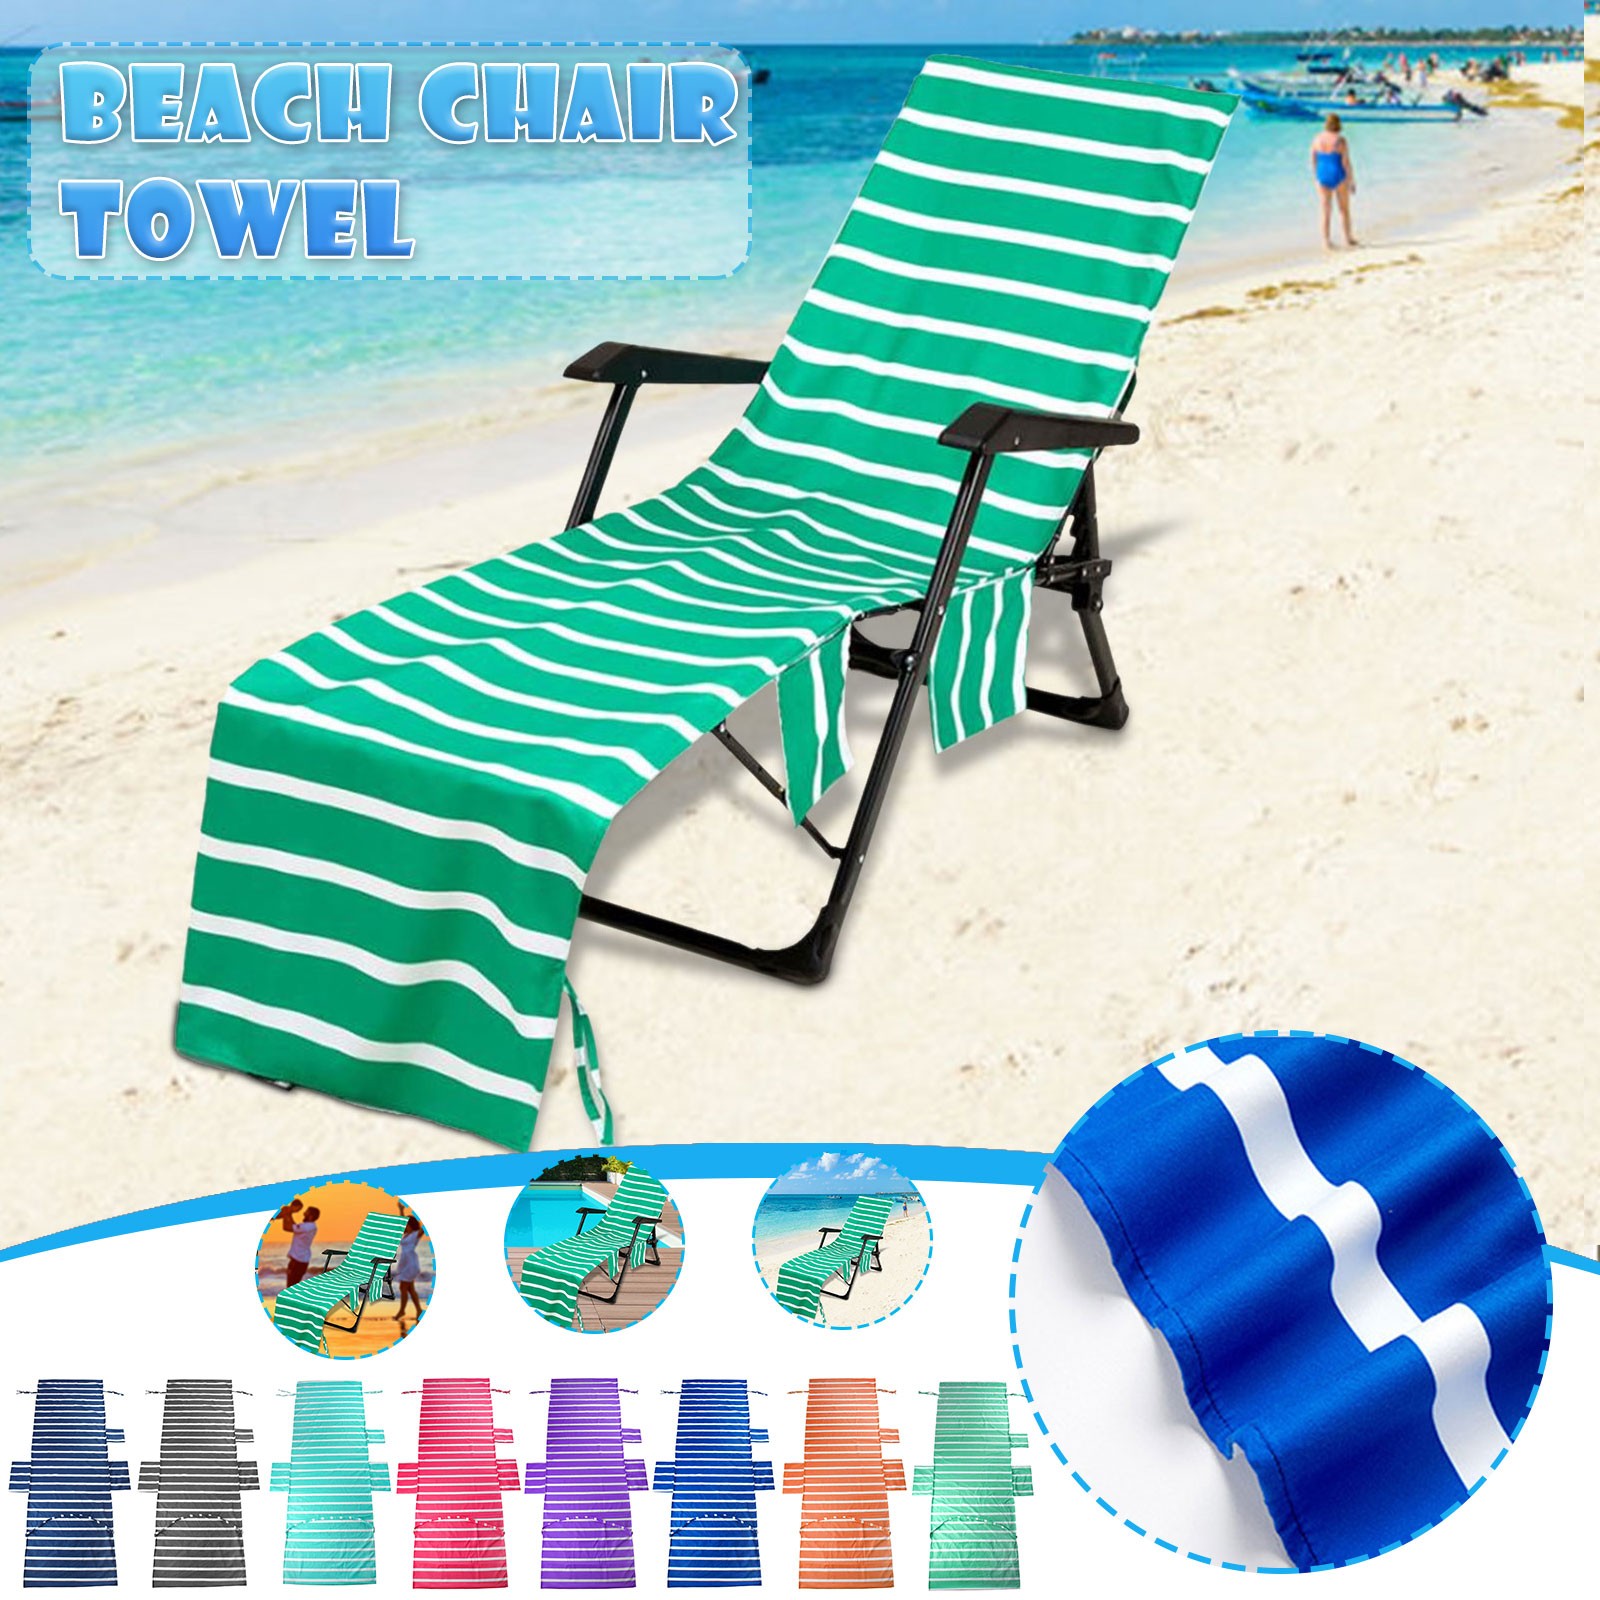 Wovilon Stripe Chair Cover Printed Beach Towel Polyester Cotton Lounge Chair Towel Striped Beach Chair Cover Printed Beach Towel - image 4 of 4